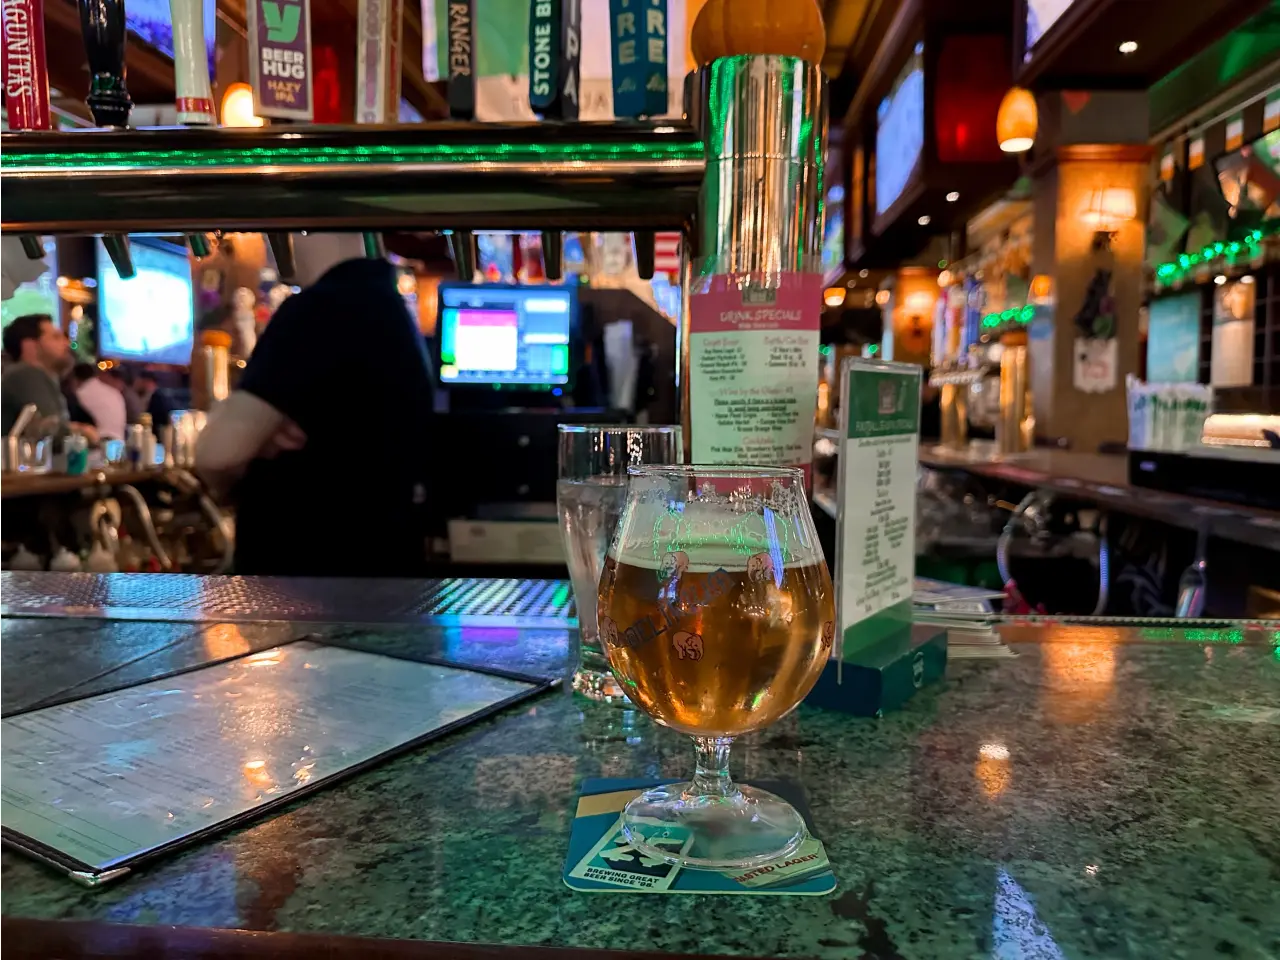 Photo of a glass of Delerium Tremens on a bar